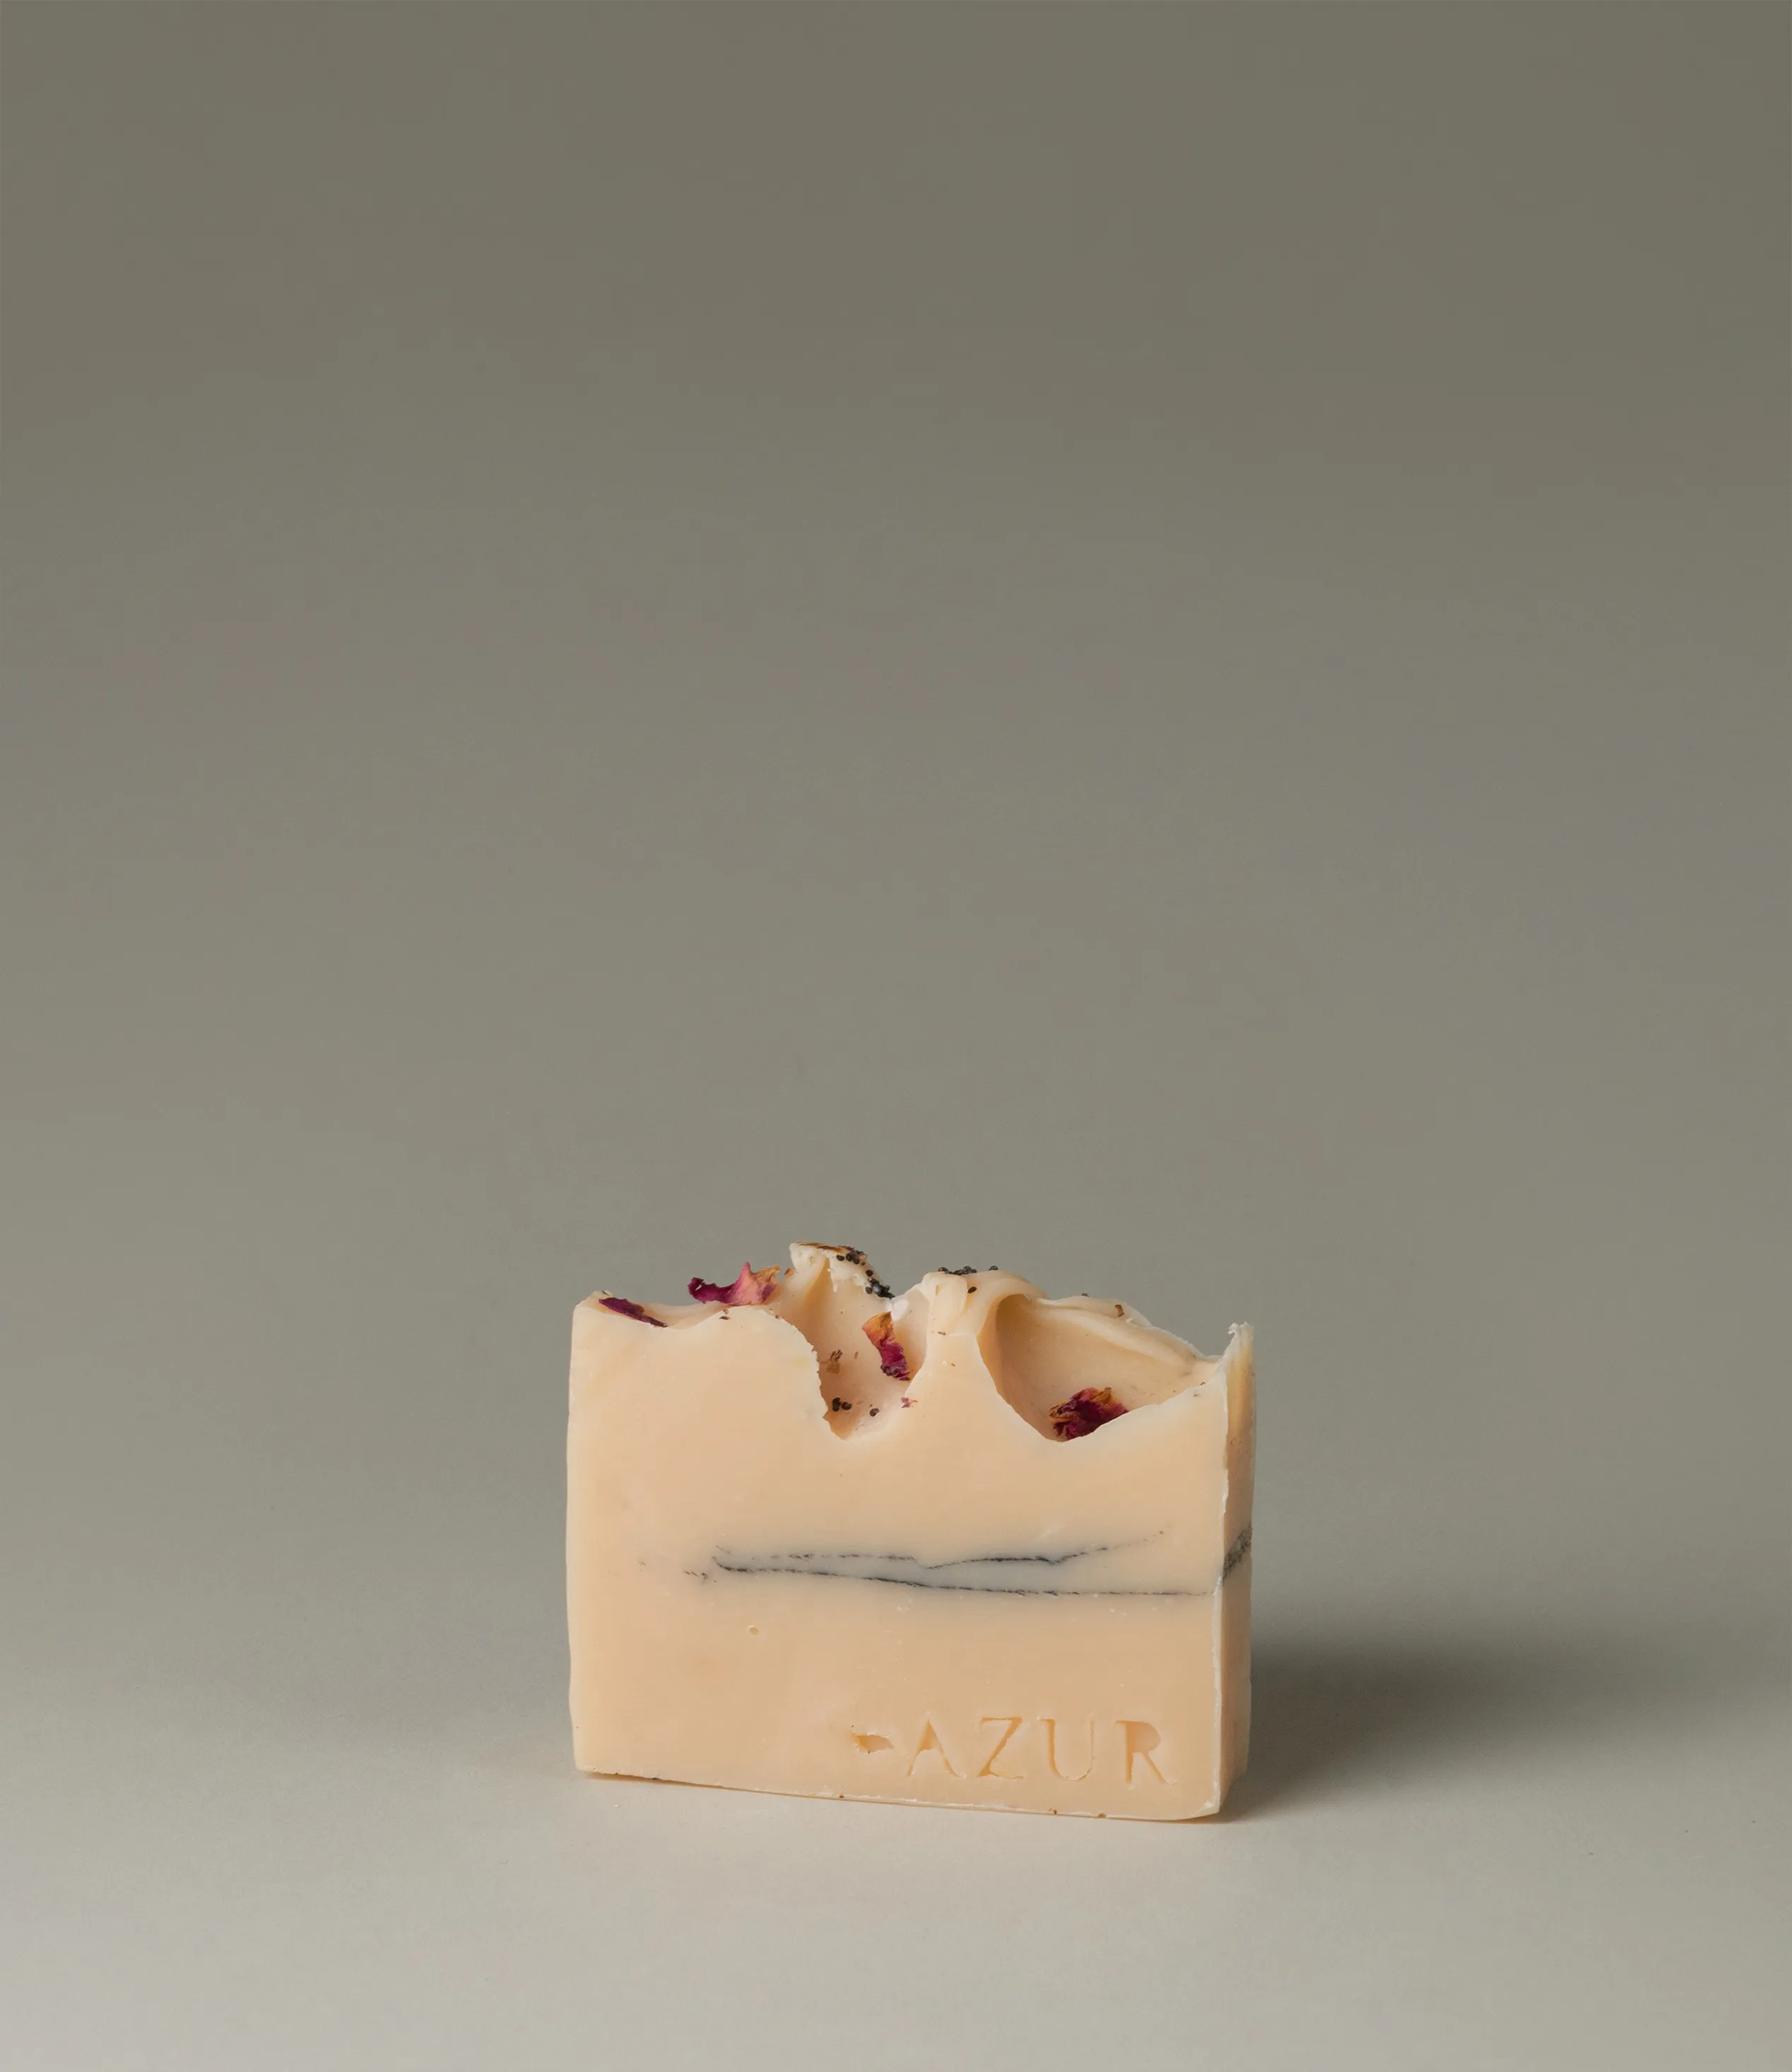 This soap has the scent of Wild Flower and it was crafted by Azur Natural Bodycare. The product merges two colors, light peach and dark grey. The top of the soap looks like the waves of the ocean and is hinted with petals.